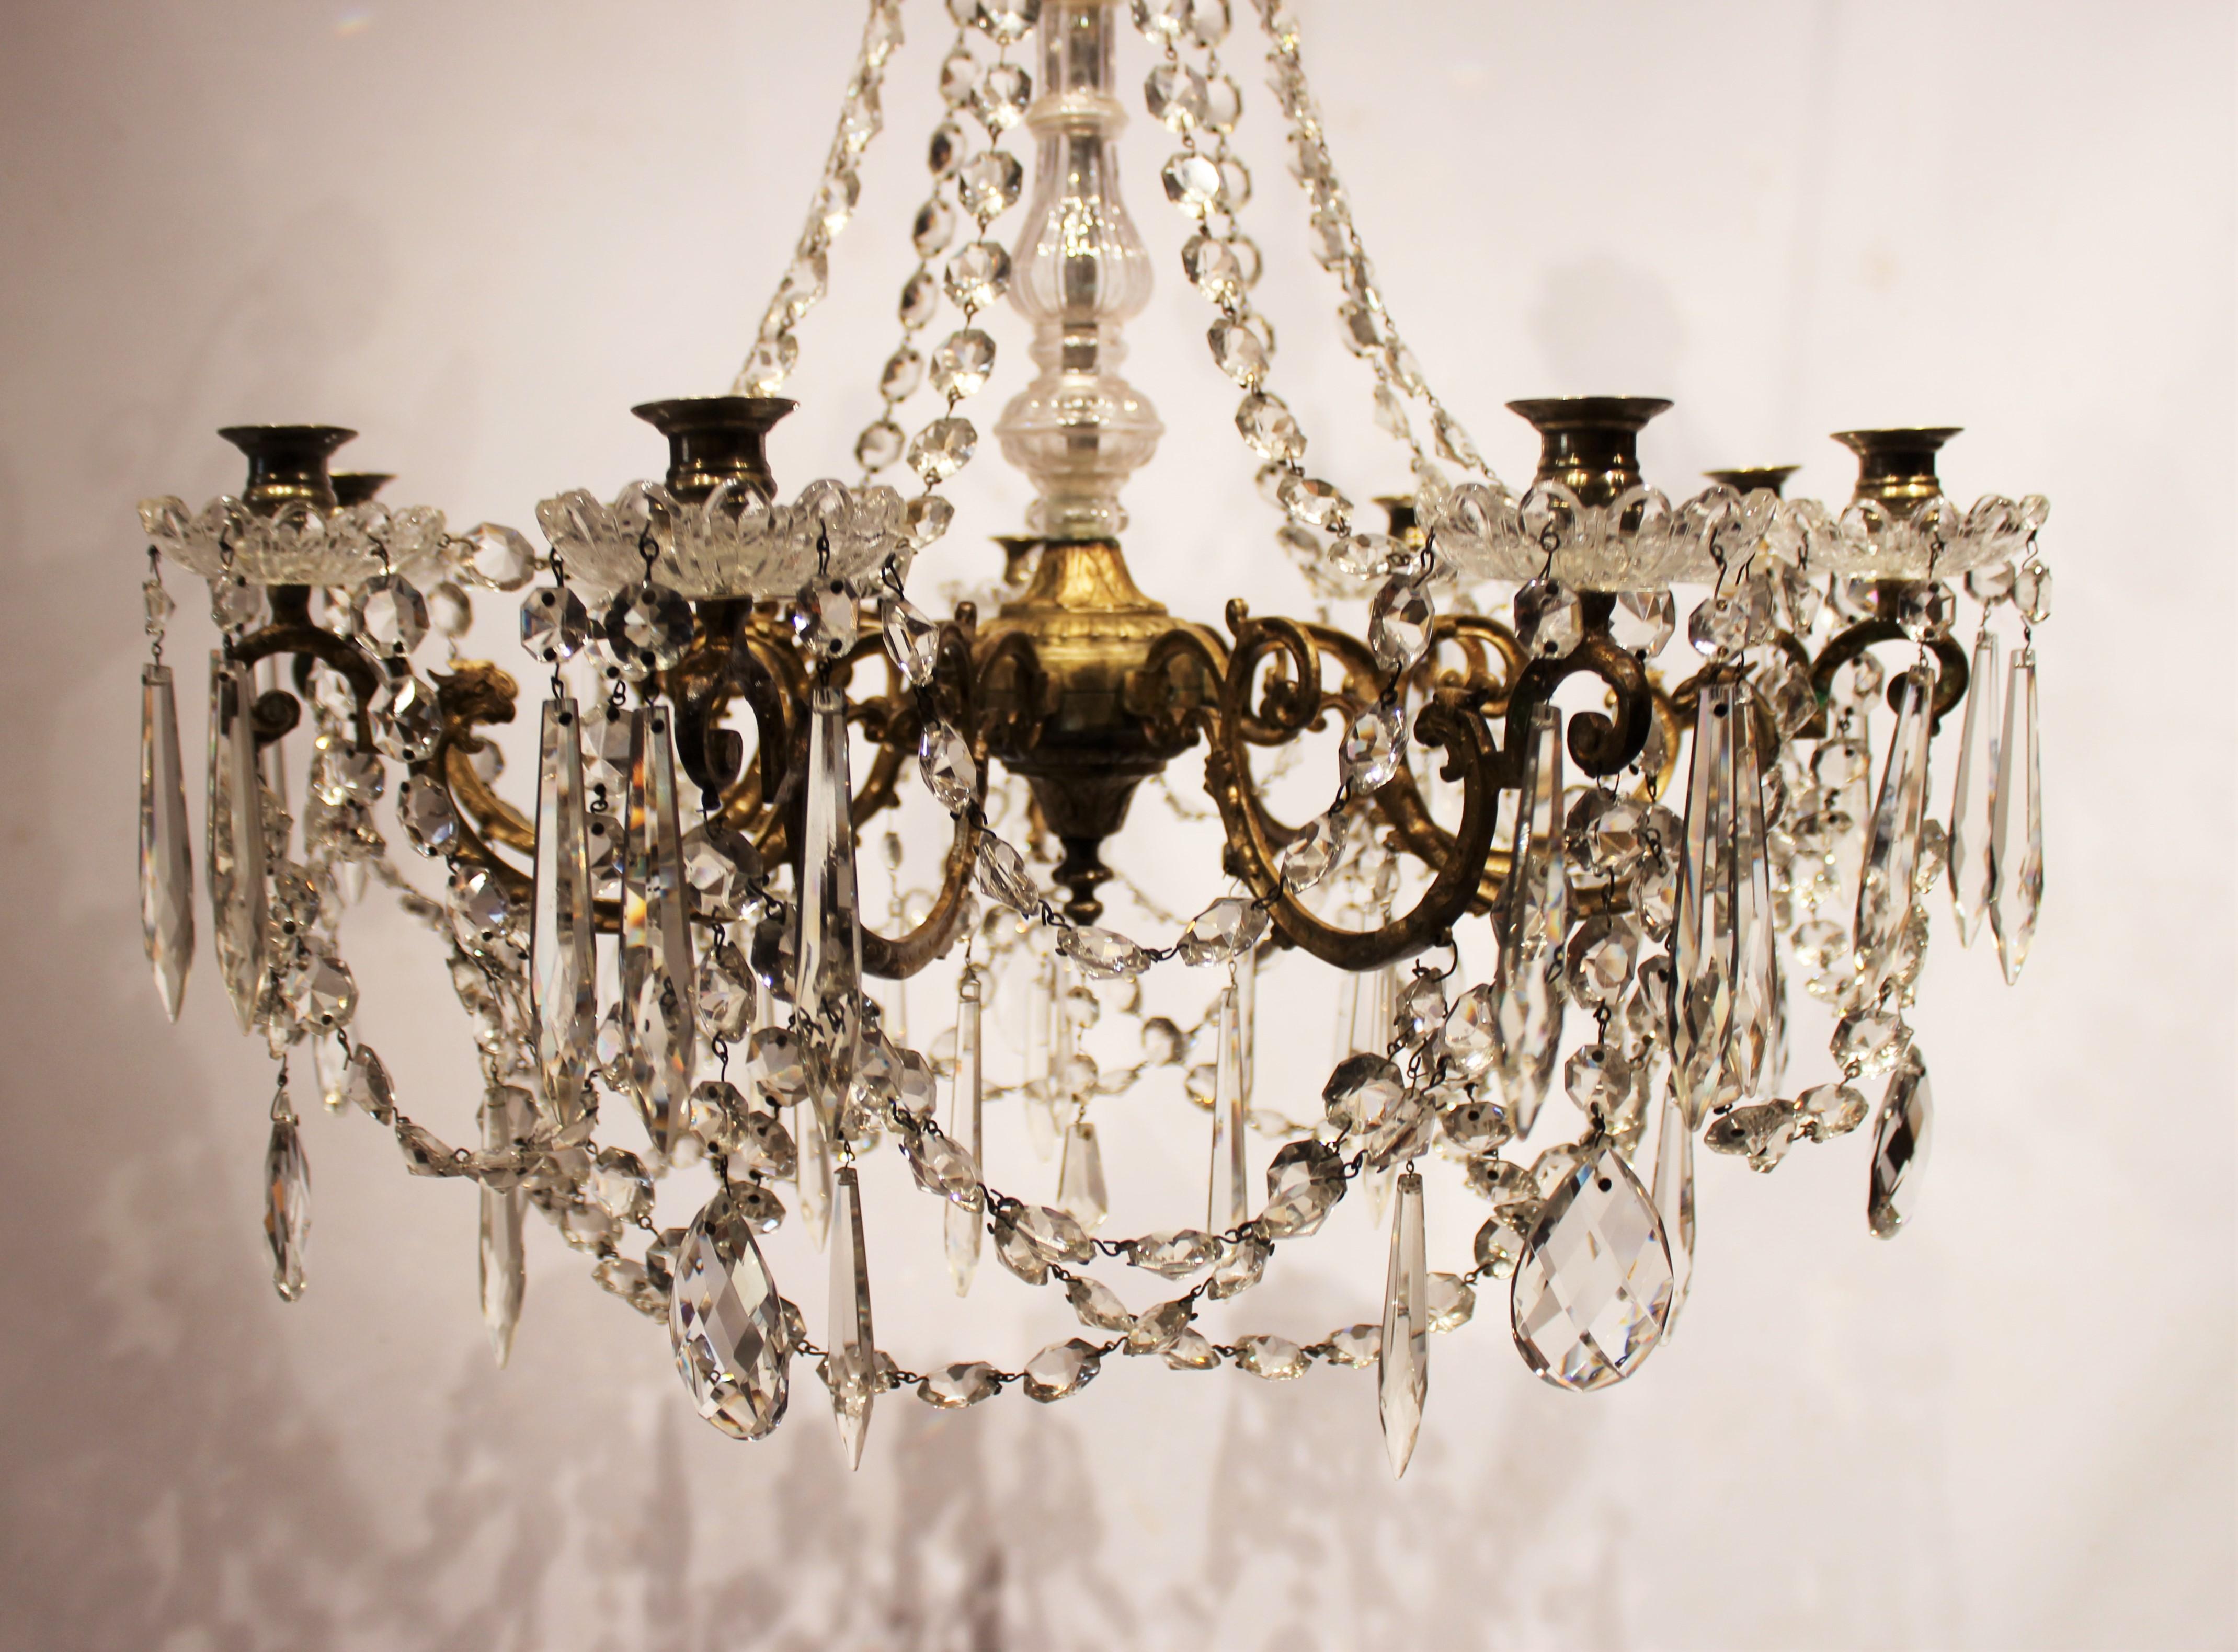 Large Gustavian chandelier of prisms and lyre gilded bronze, circa 1840s-1860s. The chandelier is in great vintage condition.